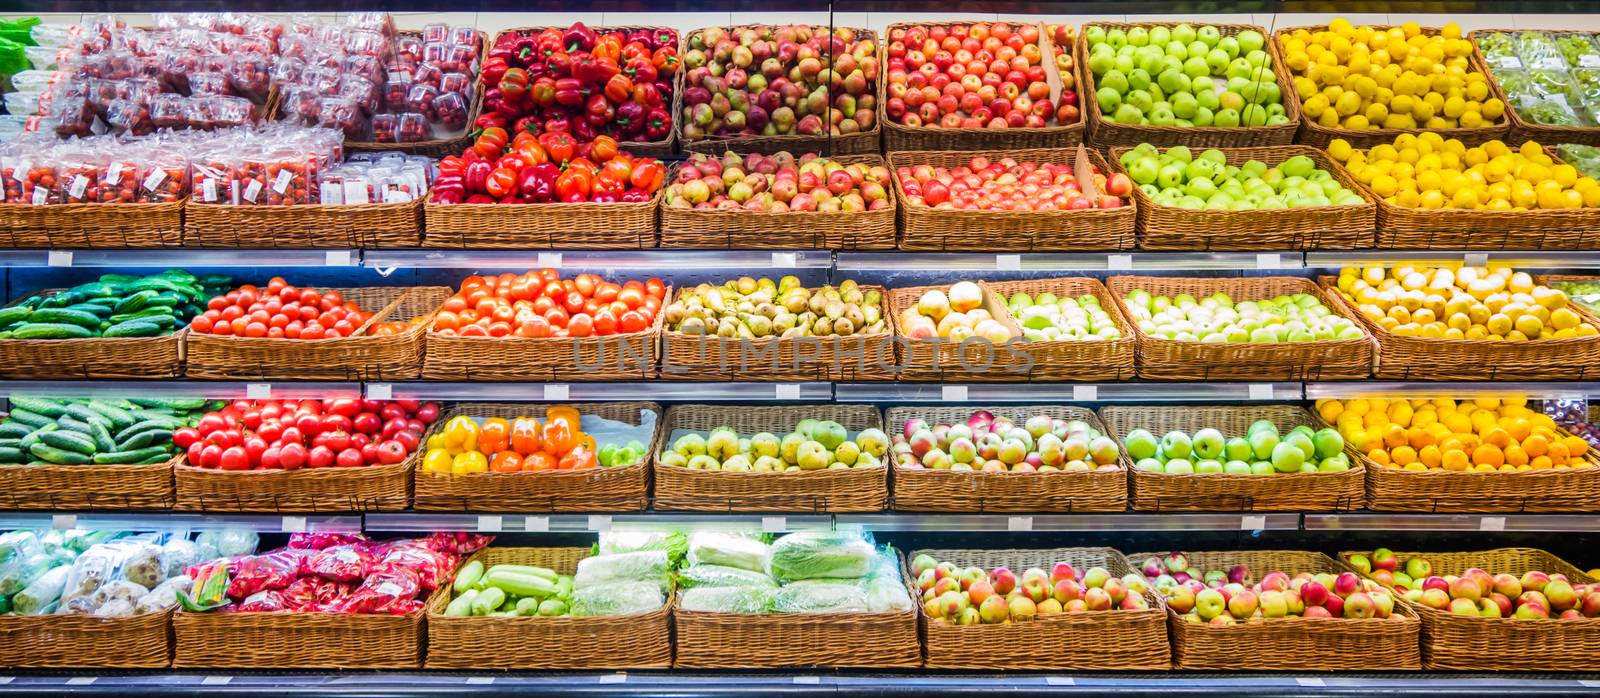 Fresh fruits and vegetables on shelf in supermarket by fascinadora